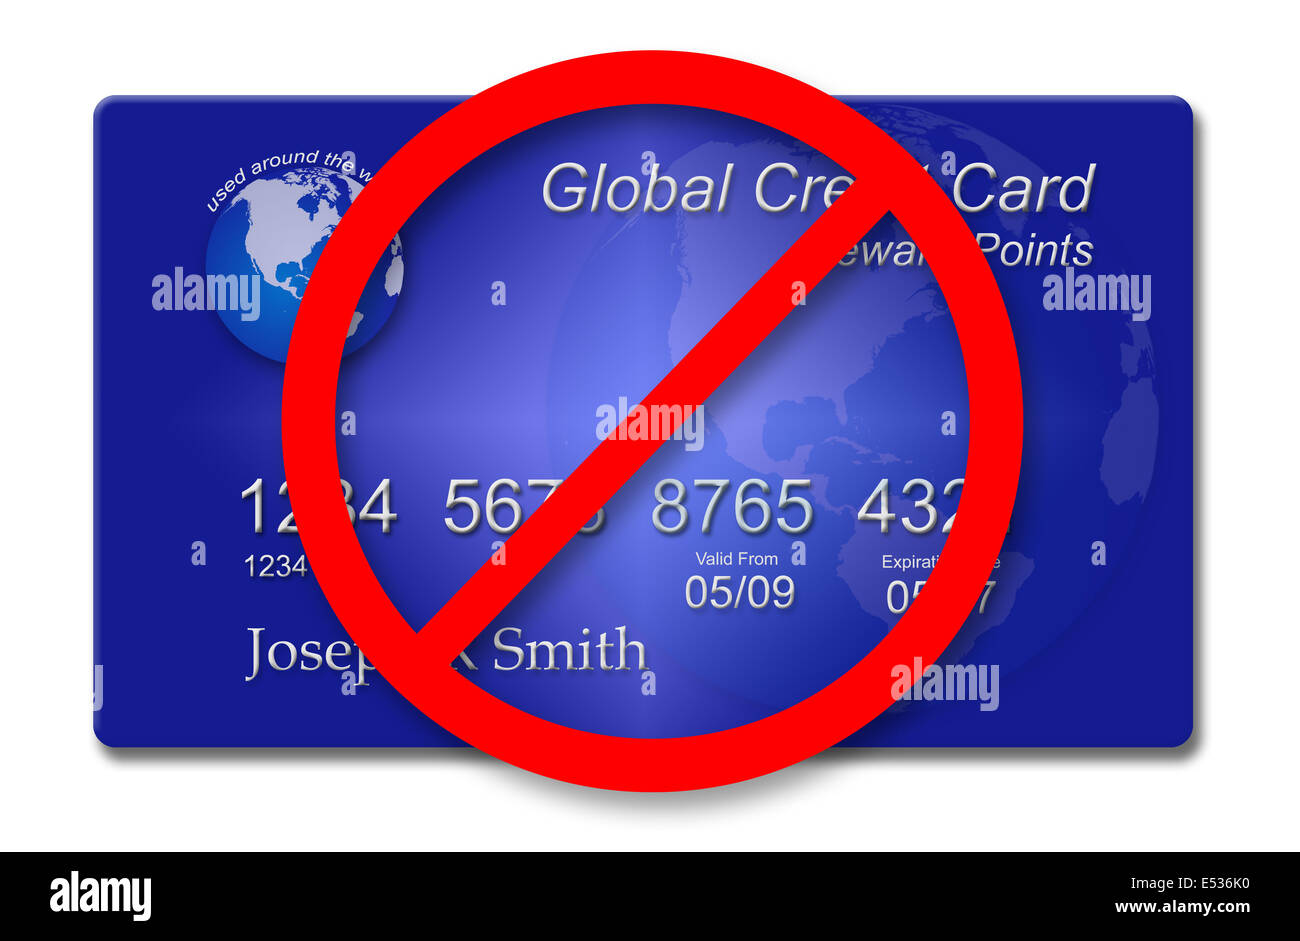 Illustration of Credit Card with No symbol stamped on the card Stock Photo